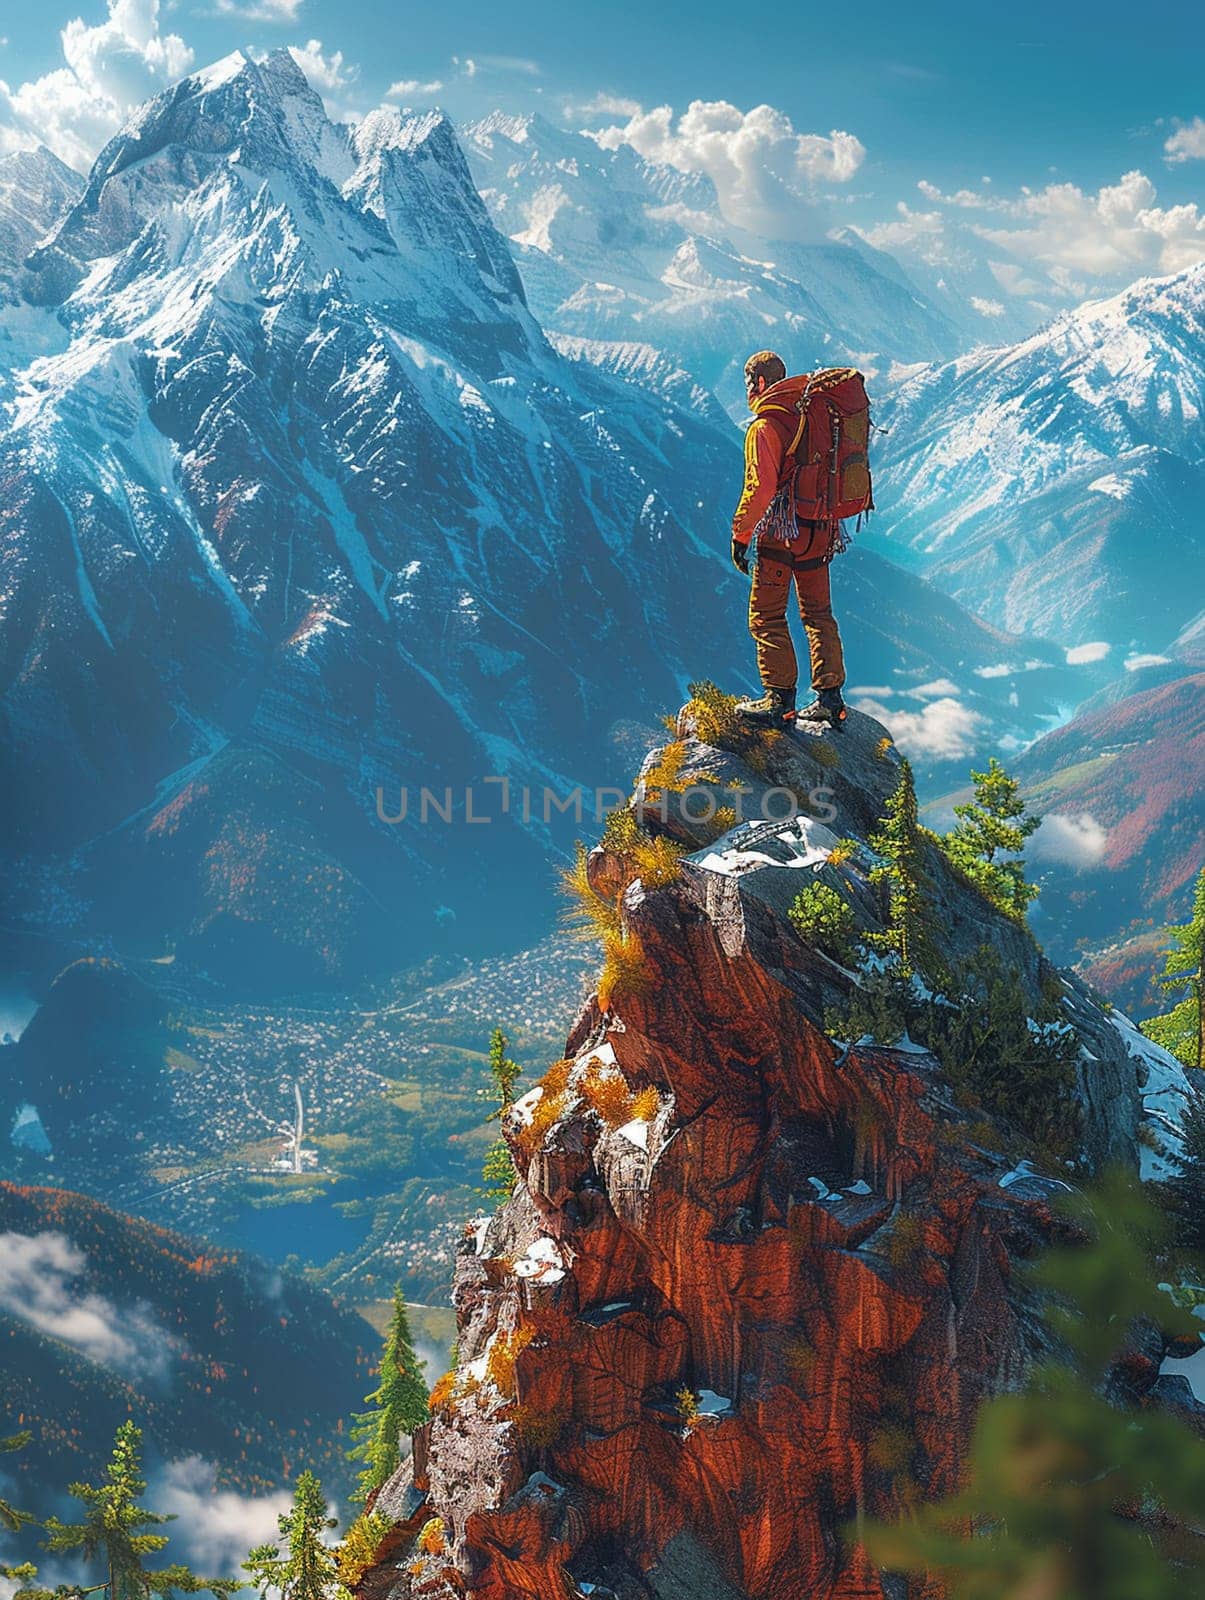 Wilderness climber scene created in a 3D digital art style by Benzoix